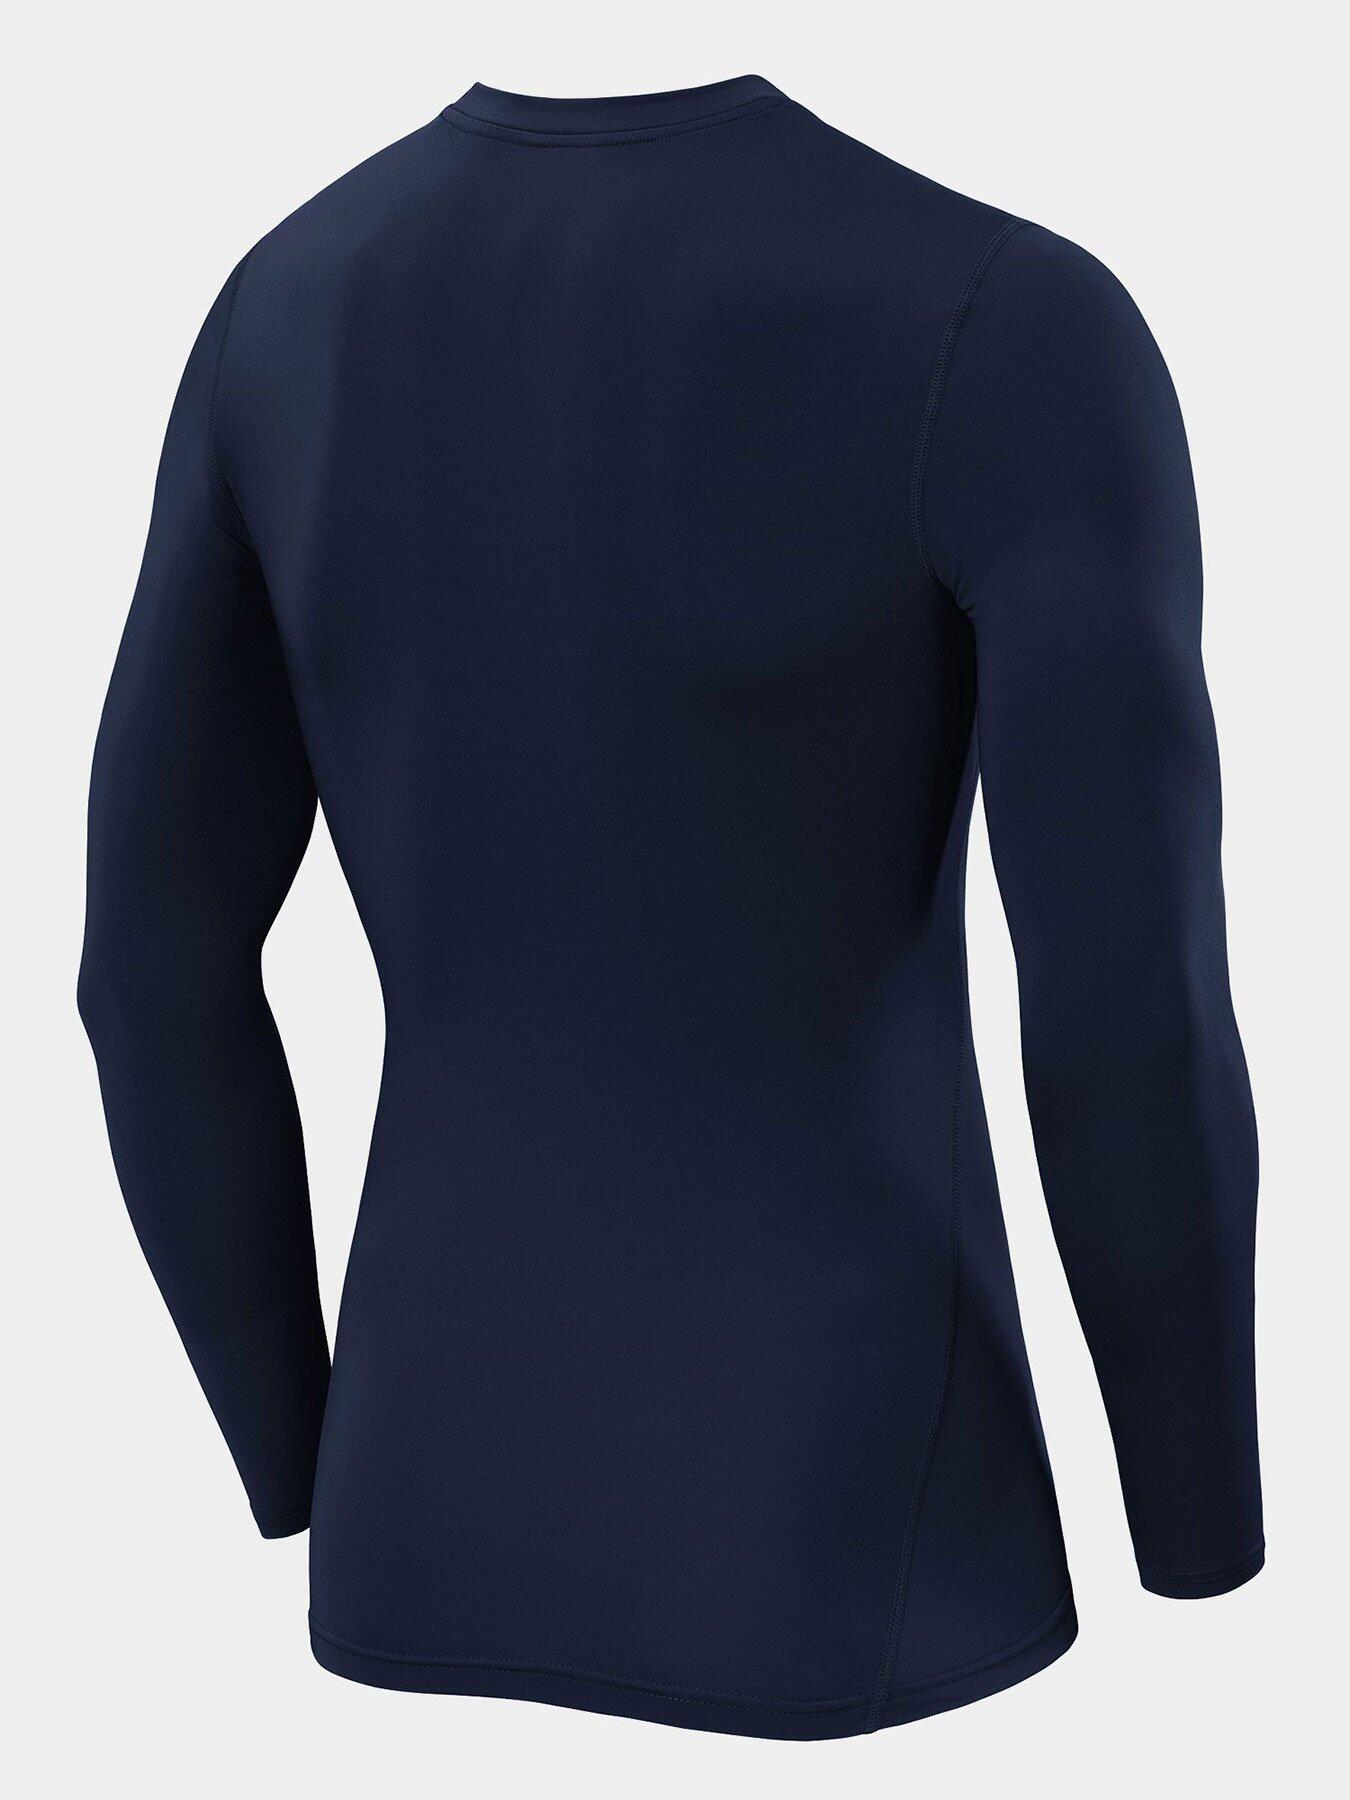 Men's Power Base Layer Compression Long Sleeve Top - Navy Eclipse 2/5